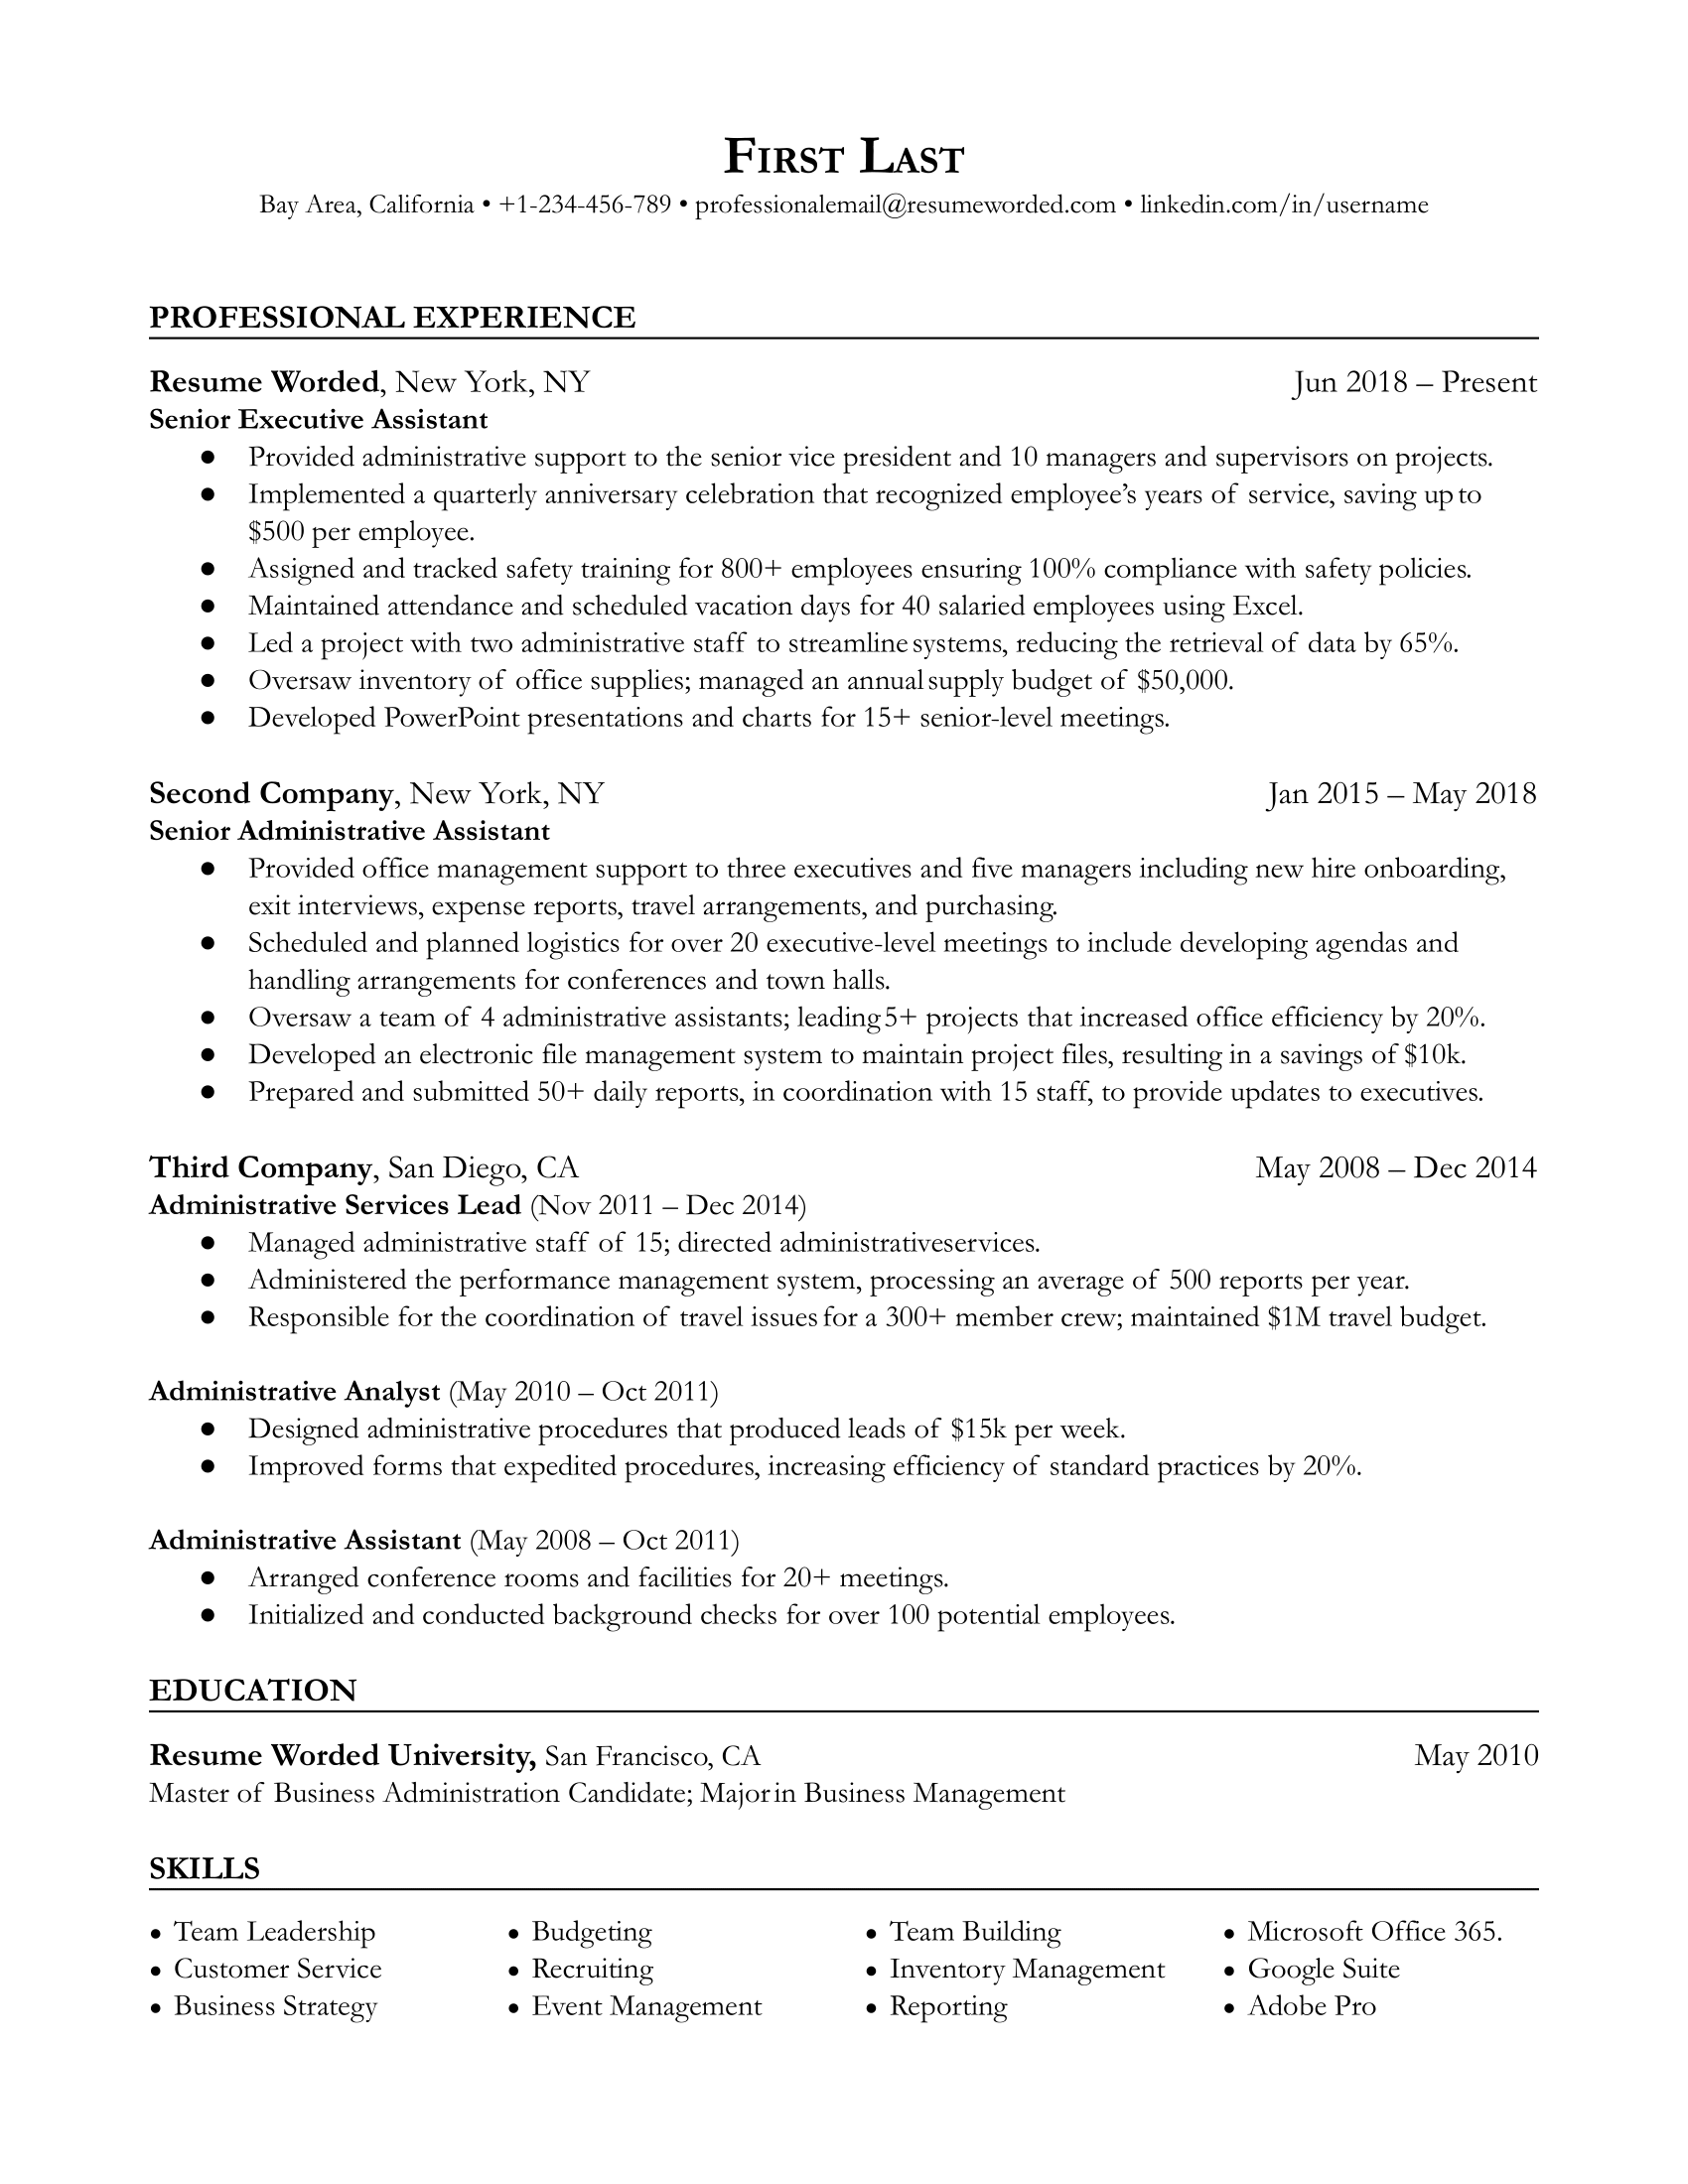 Senior Executive Assistant Resume Template + Example